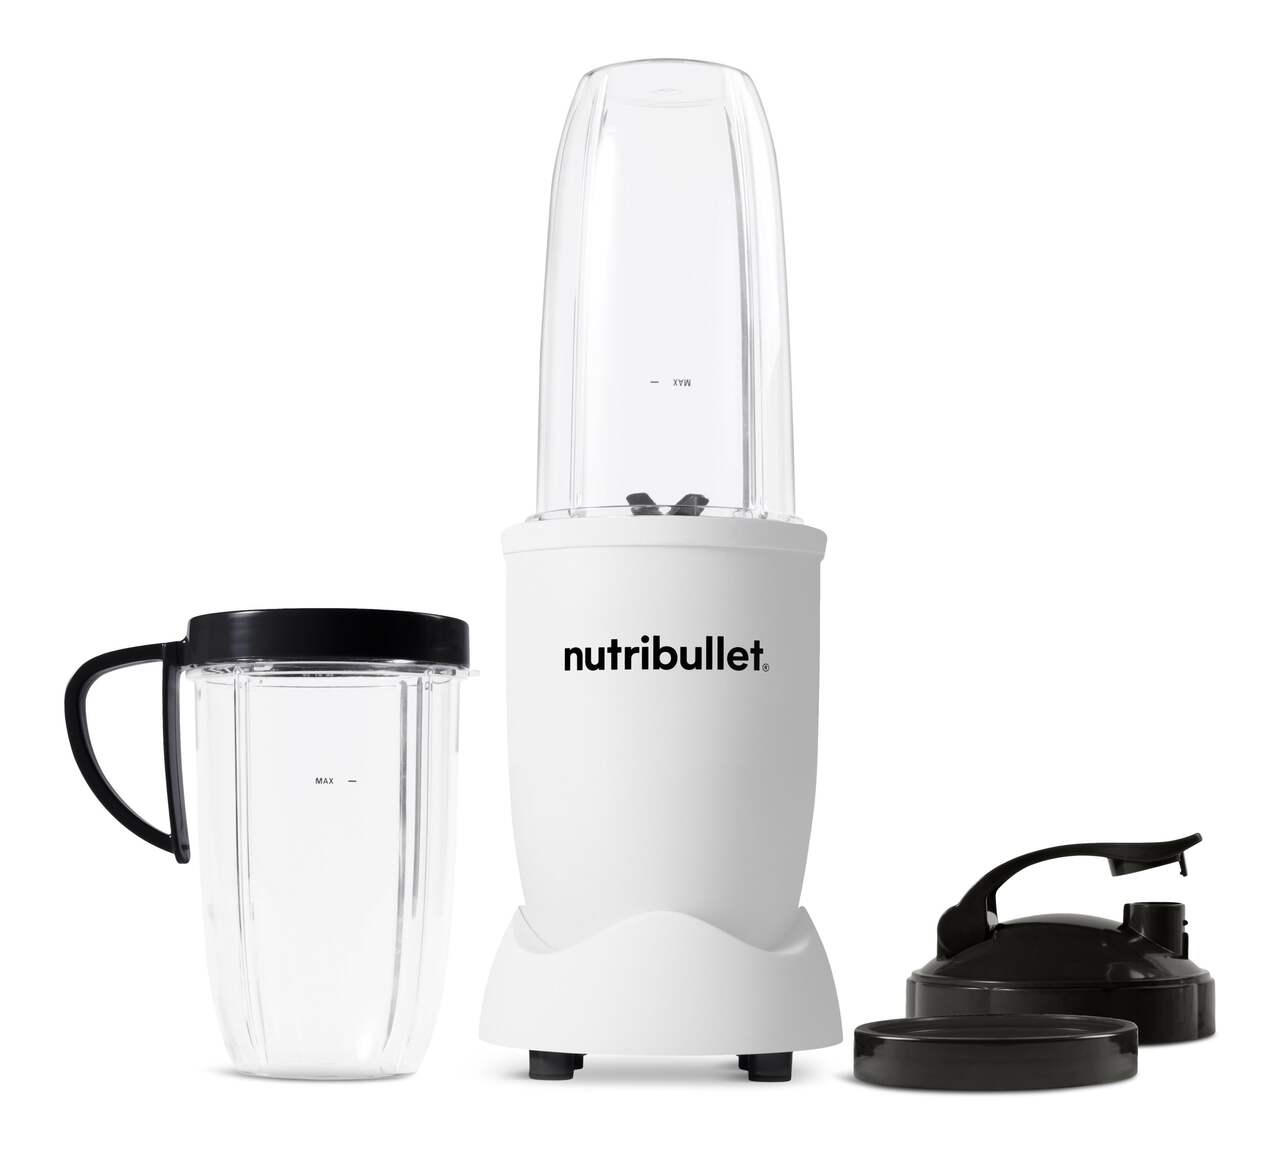 https://media-www.canadiantire.ca/product/living/kitchen/kitchen-appliances/0430303/nutribullet-magic-bullet-900-matte-white-0e2b4617-2c0b-4619-ab47-5a3b73e6a7a6-jpgrendition.jpg?imdensity=1&imwidth=640&impolicy=mZoom